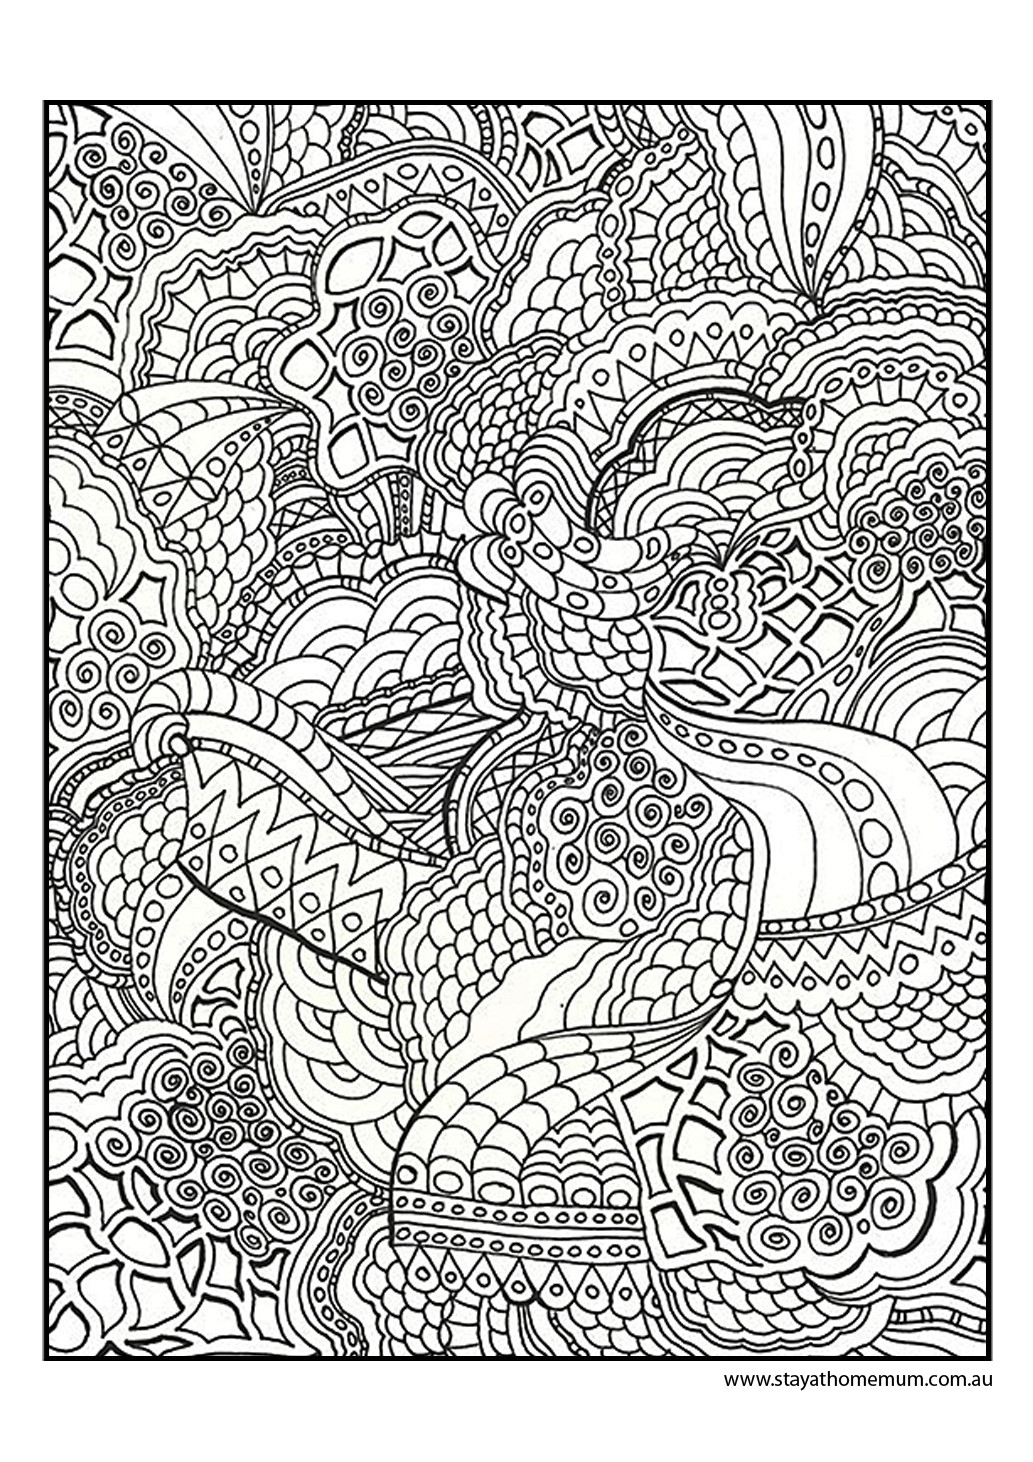 Printable Coloring Pages For Adults
 Printable Colouring Pages for Kids and Adults